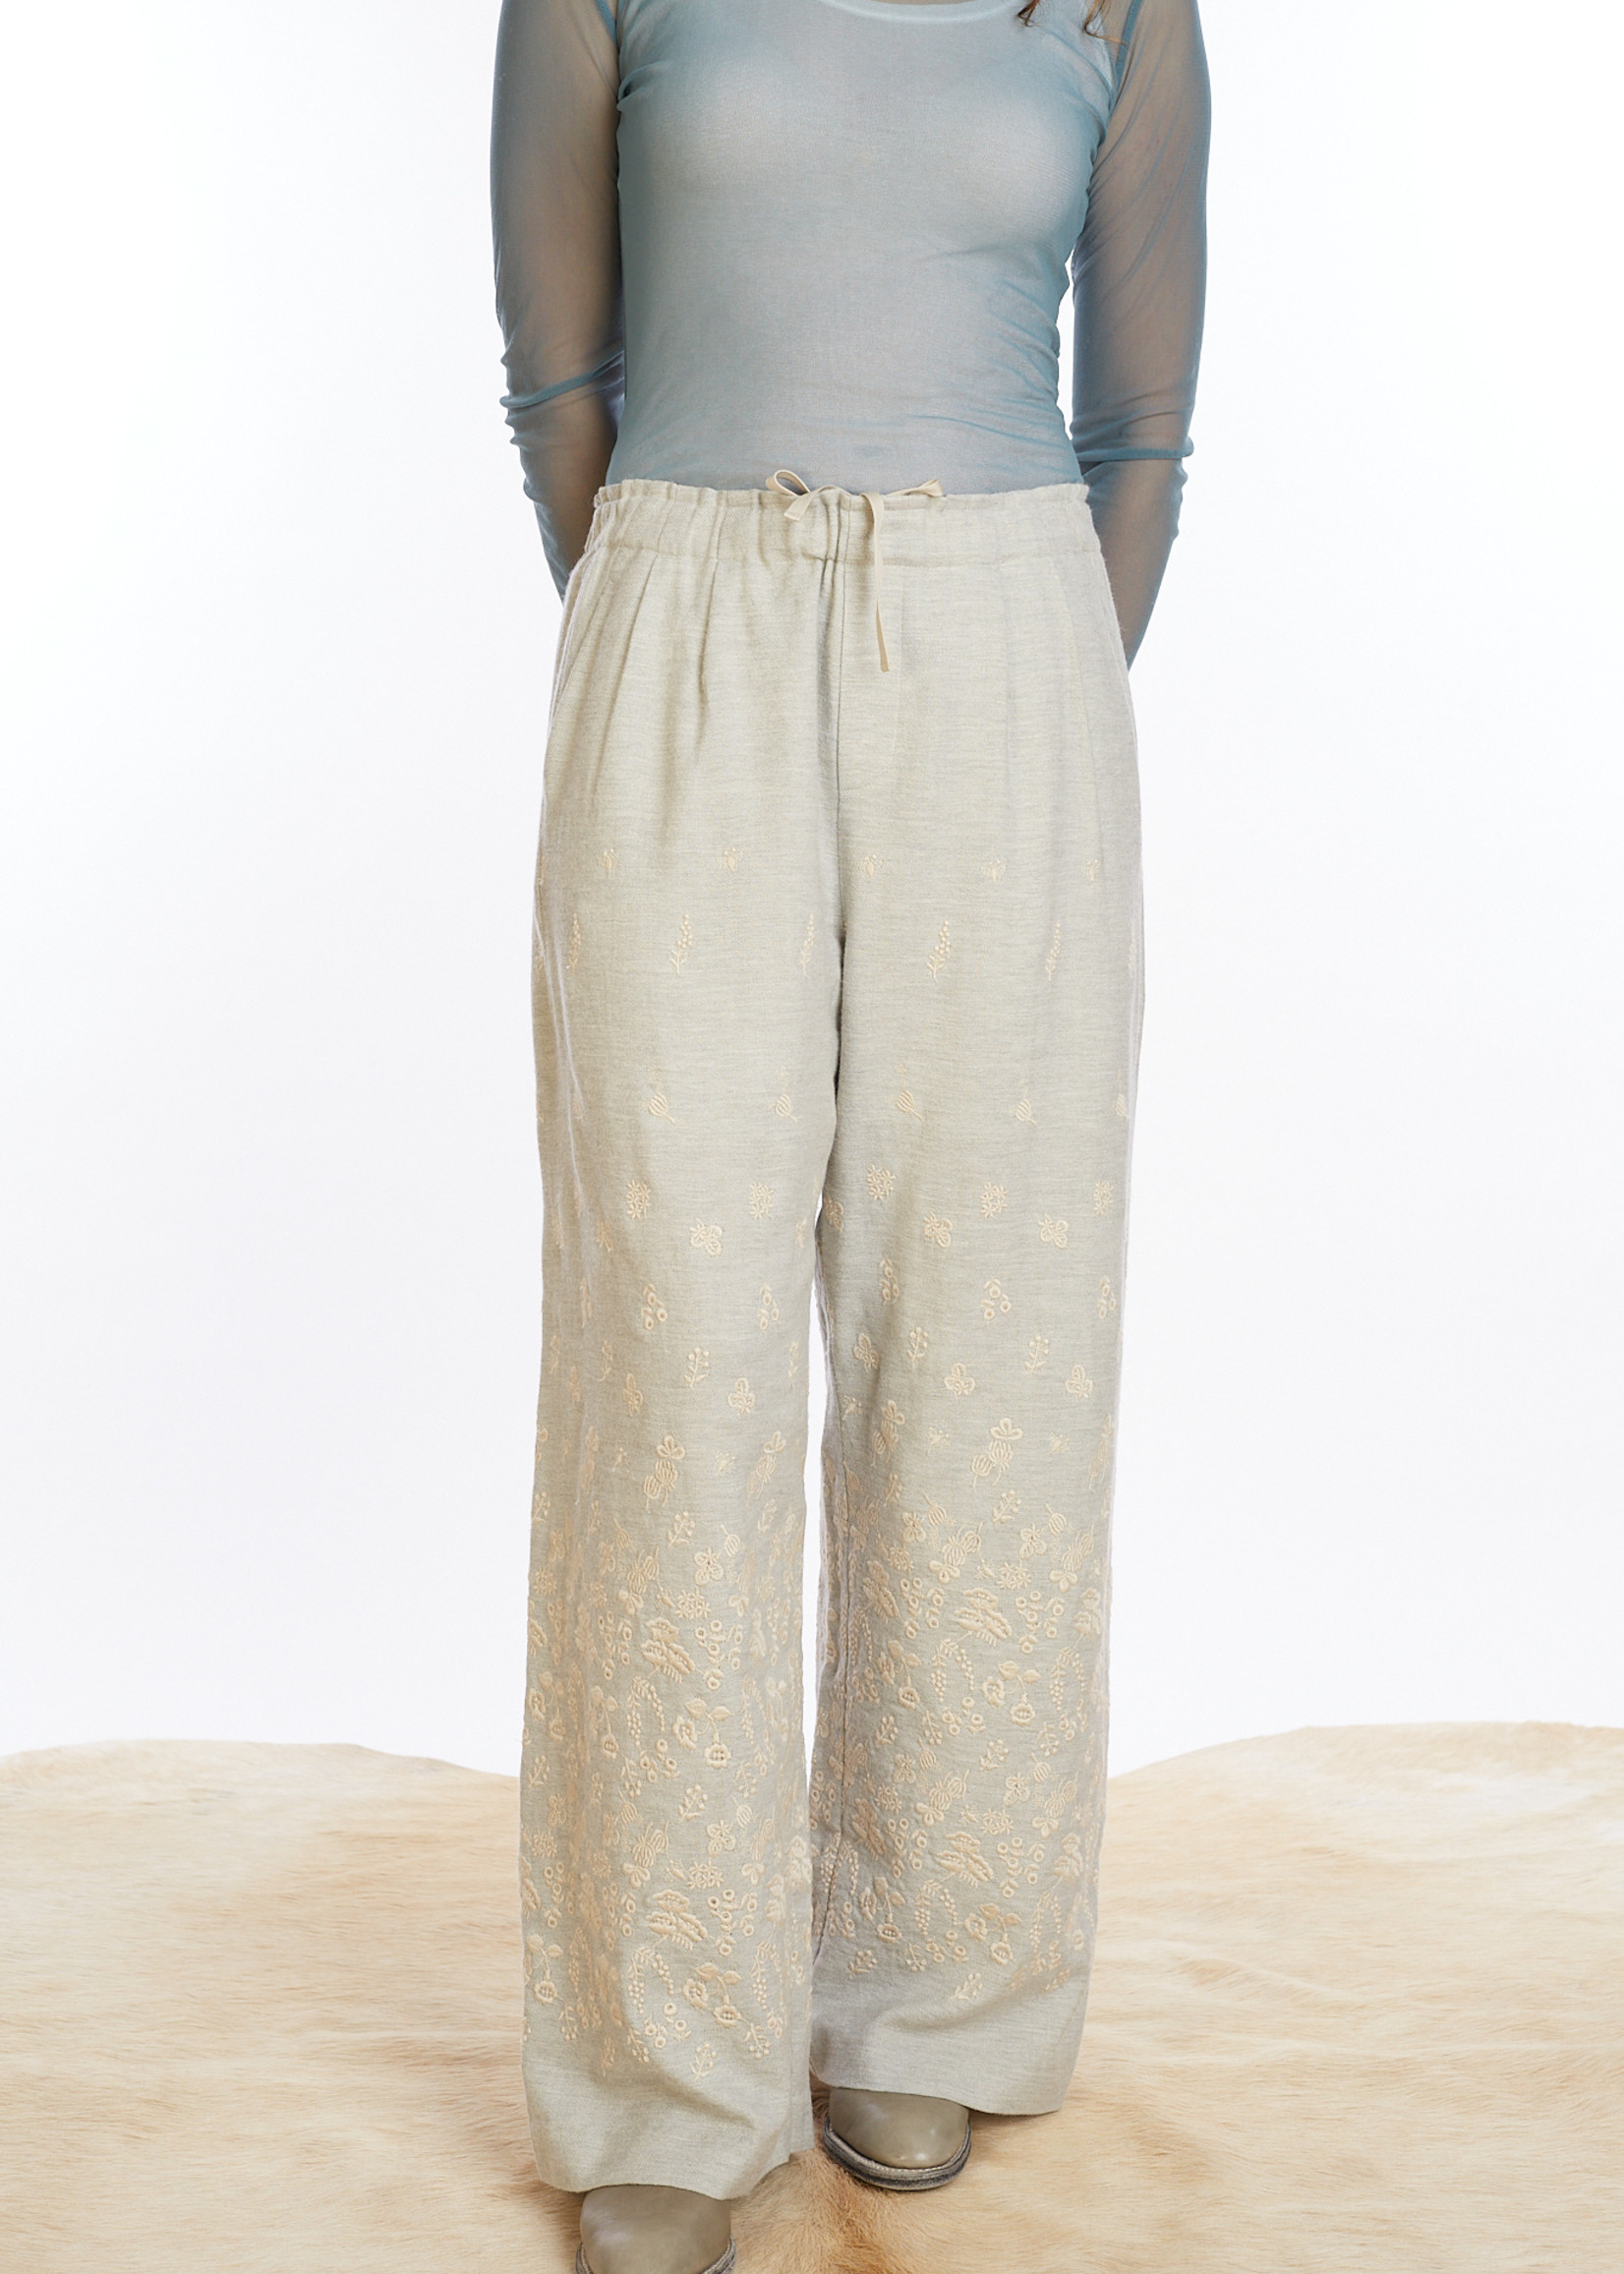 Antipast Woven Trousers Ep166 Light Grey